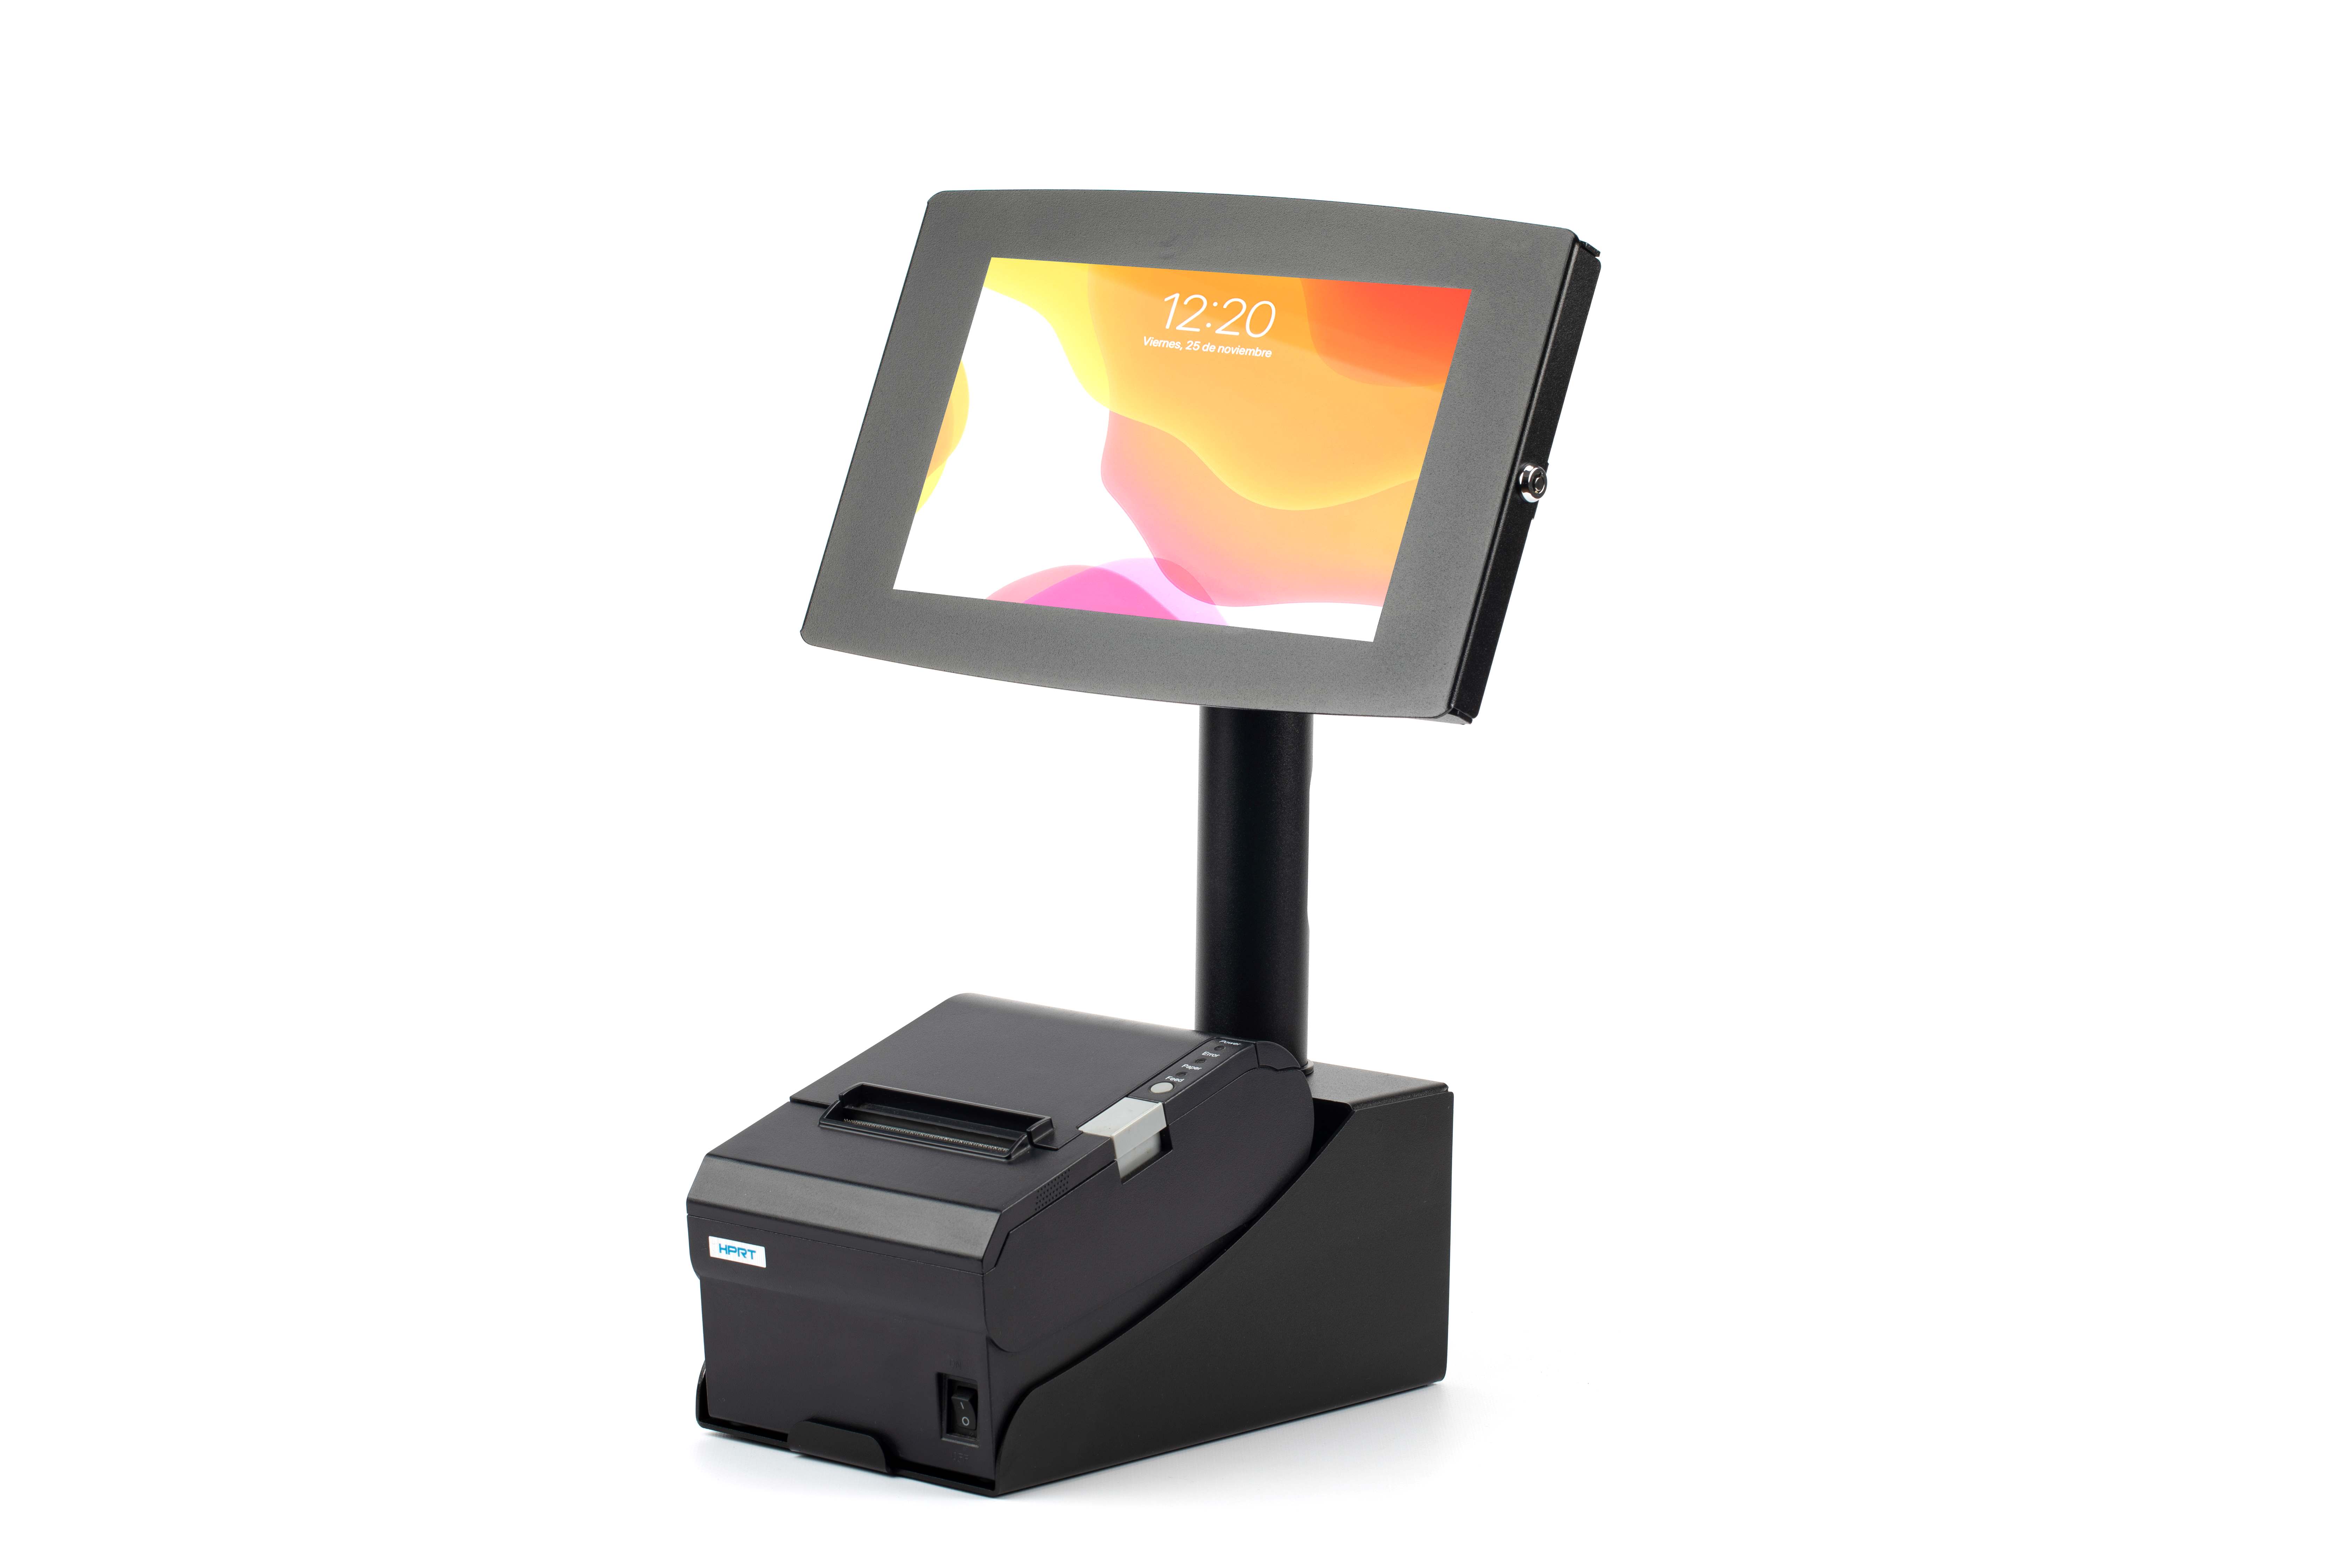 Queue Management and Check-in Compact Kiosk with Frame. Security Lock